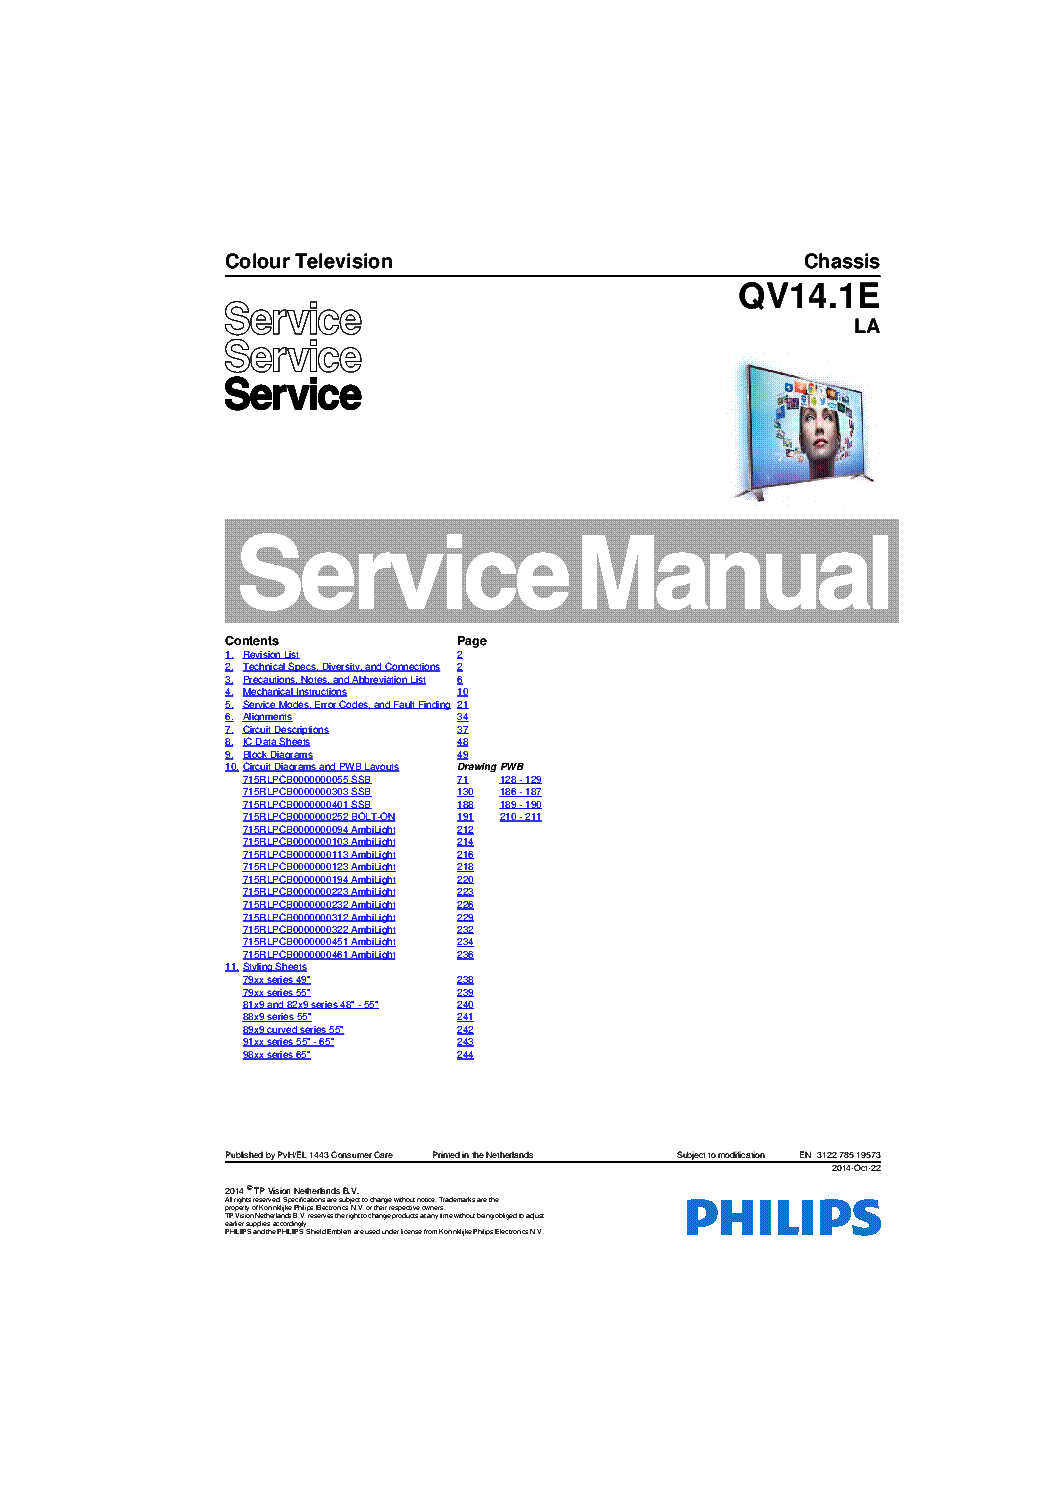 PHILIPS CHASSIS QV14.1ELA 19573 SM service manual (1st page)